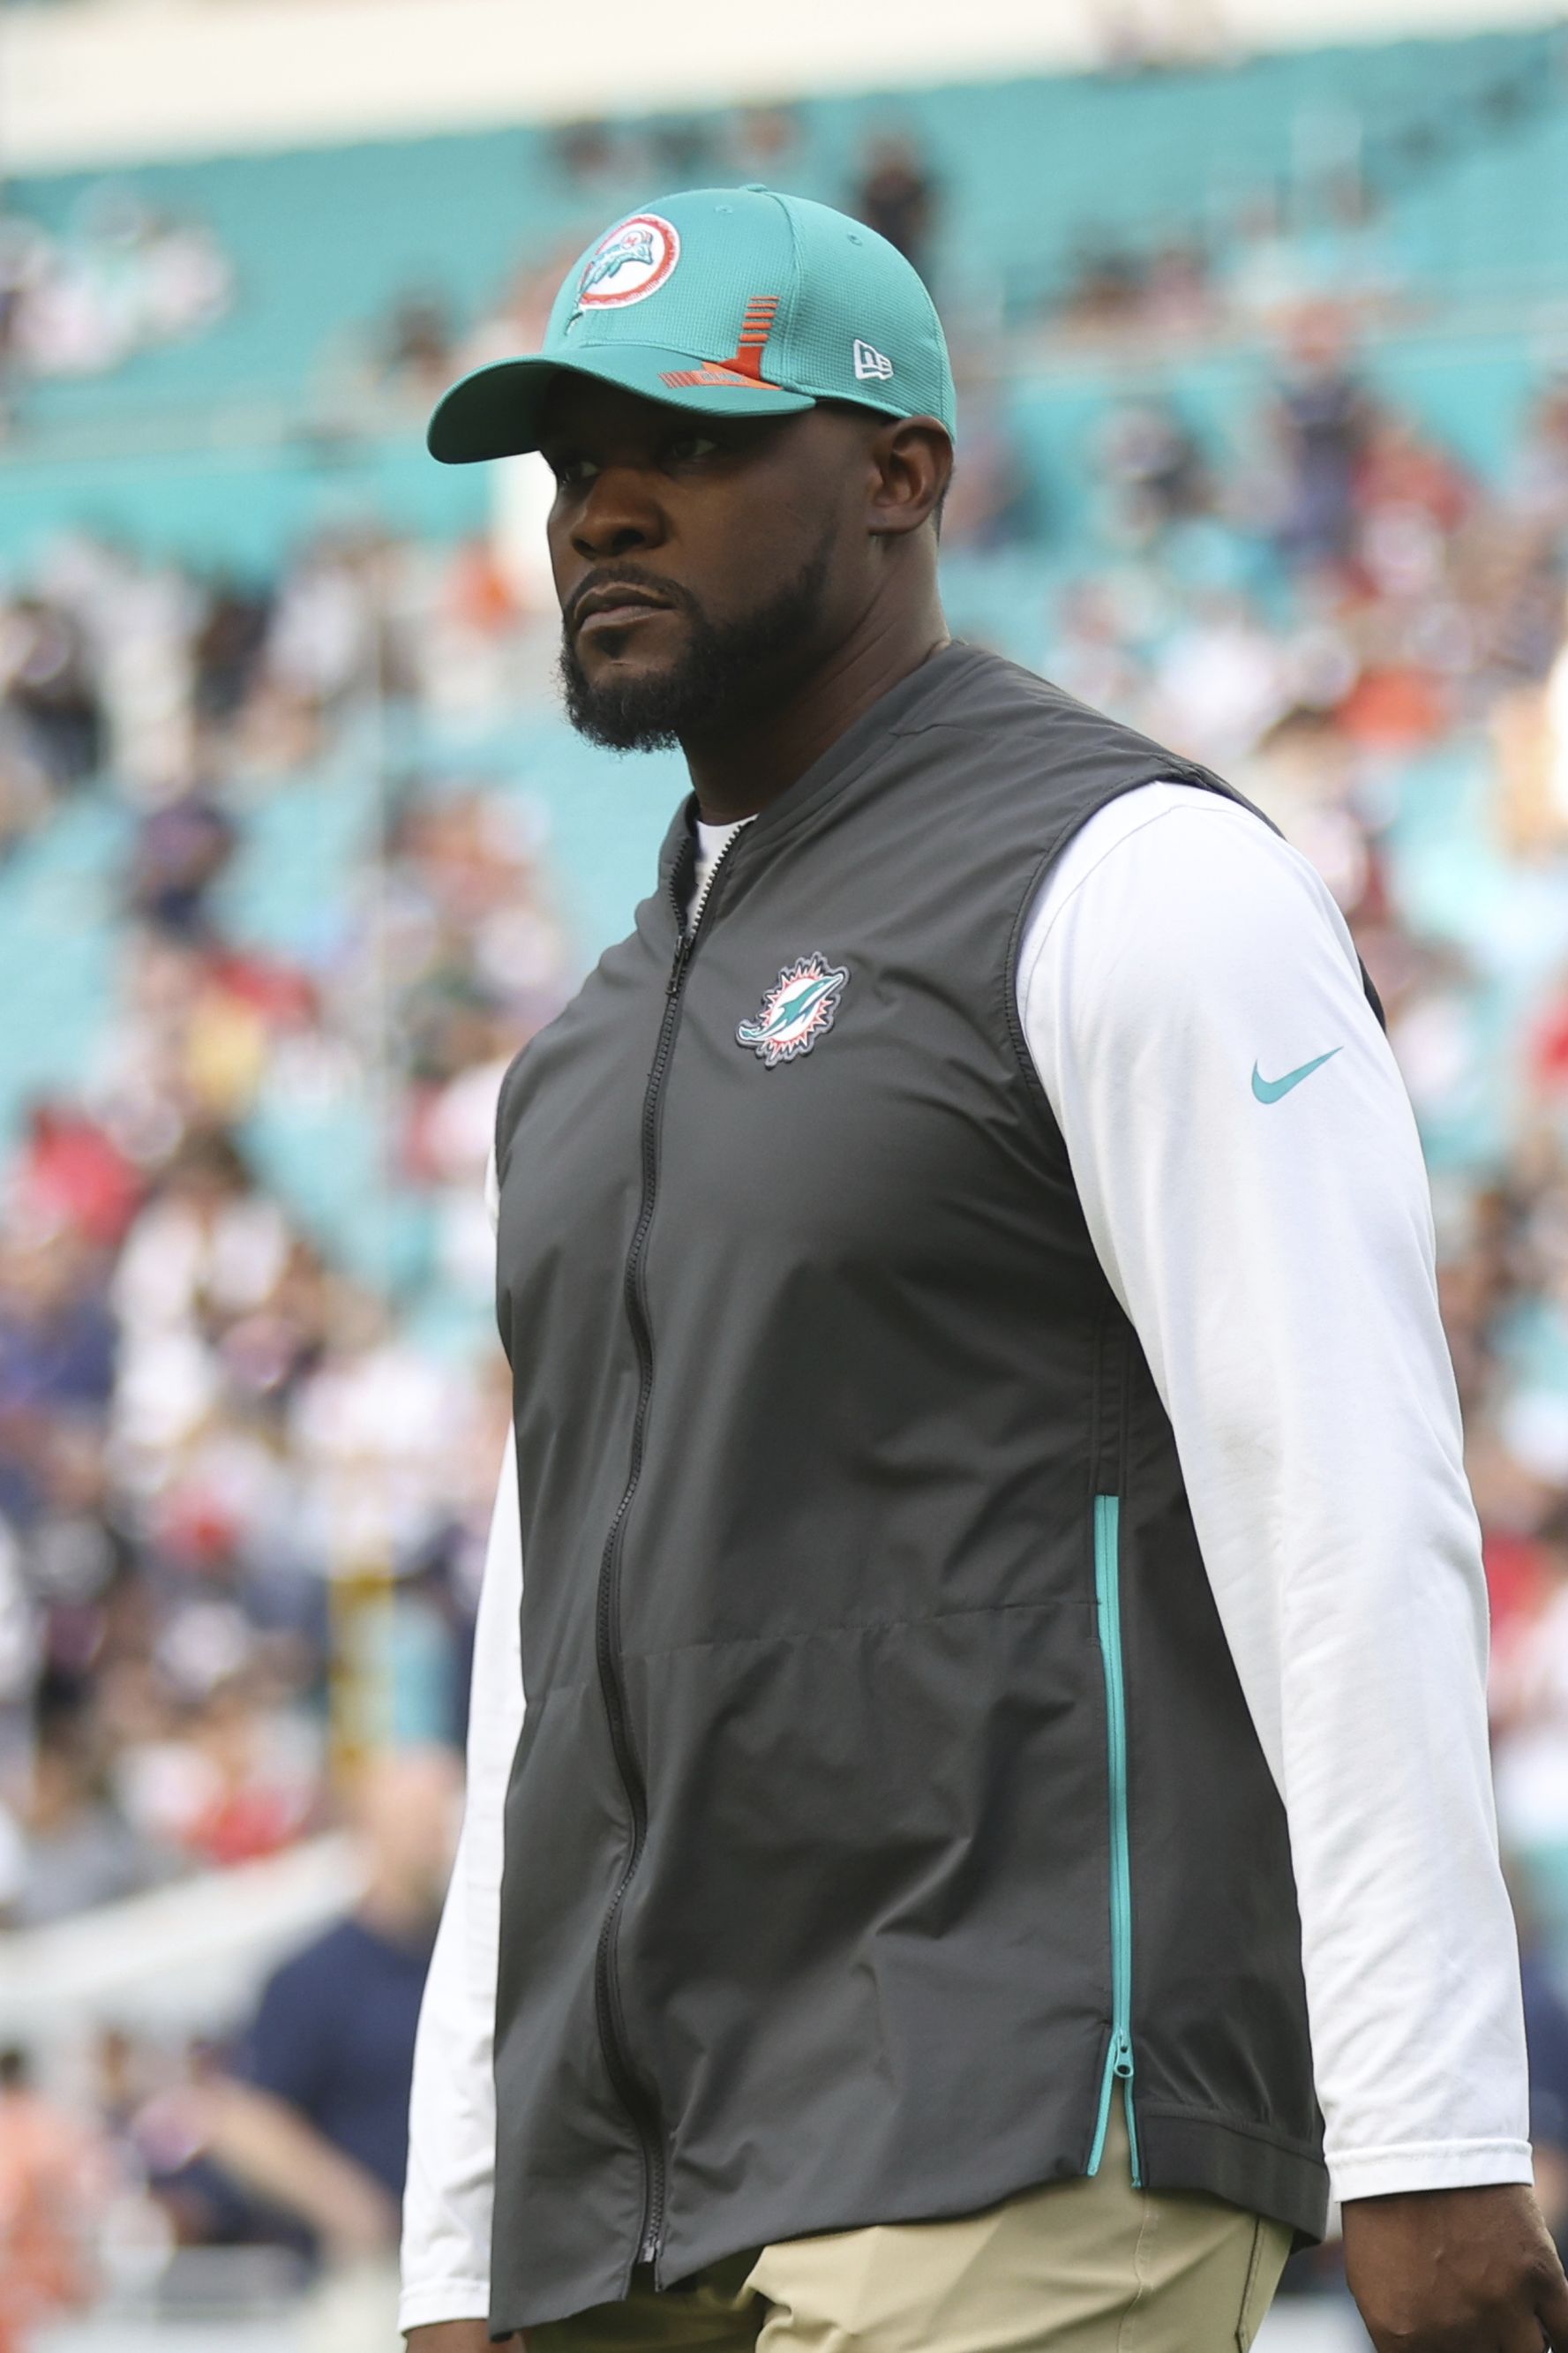 Former Miami Dolphins head coach Brian Flores claims he was offered money  to keep quiet after firing | CNN